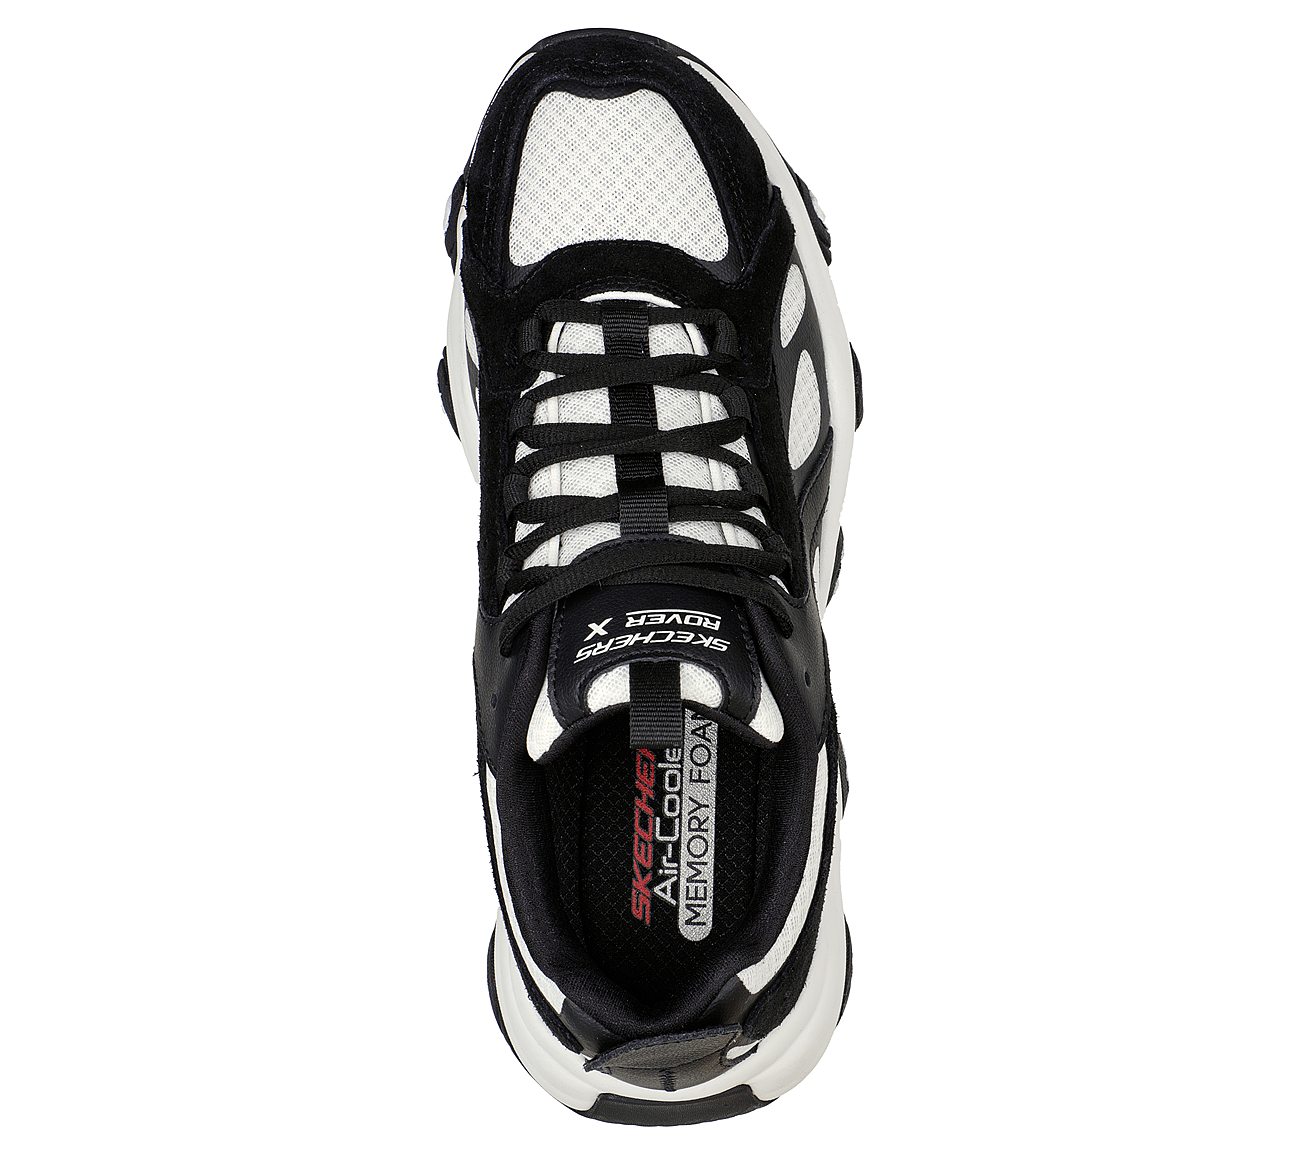 ROVER X, BLACK/WHITE Footwear Top View